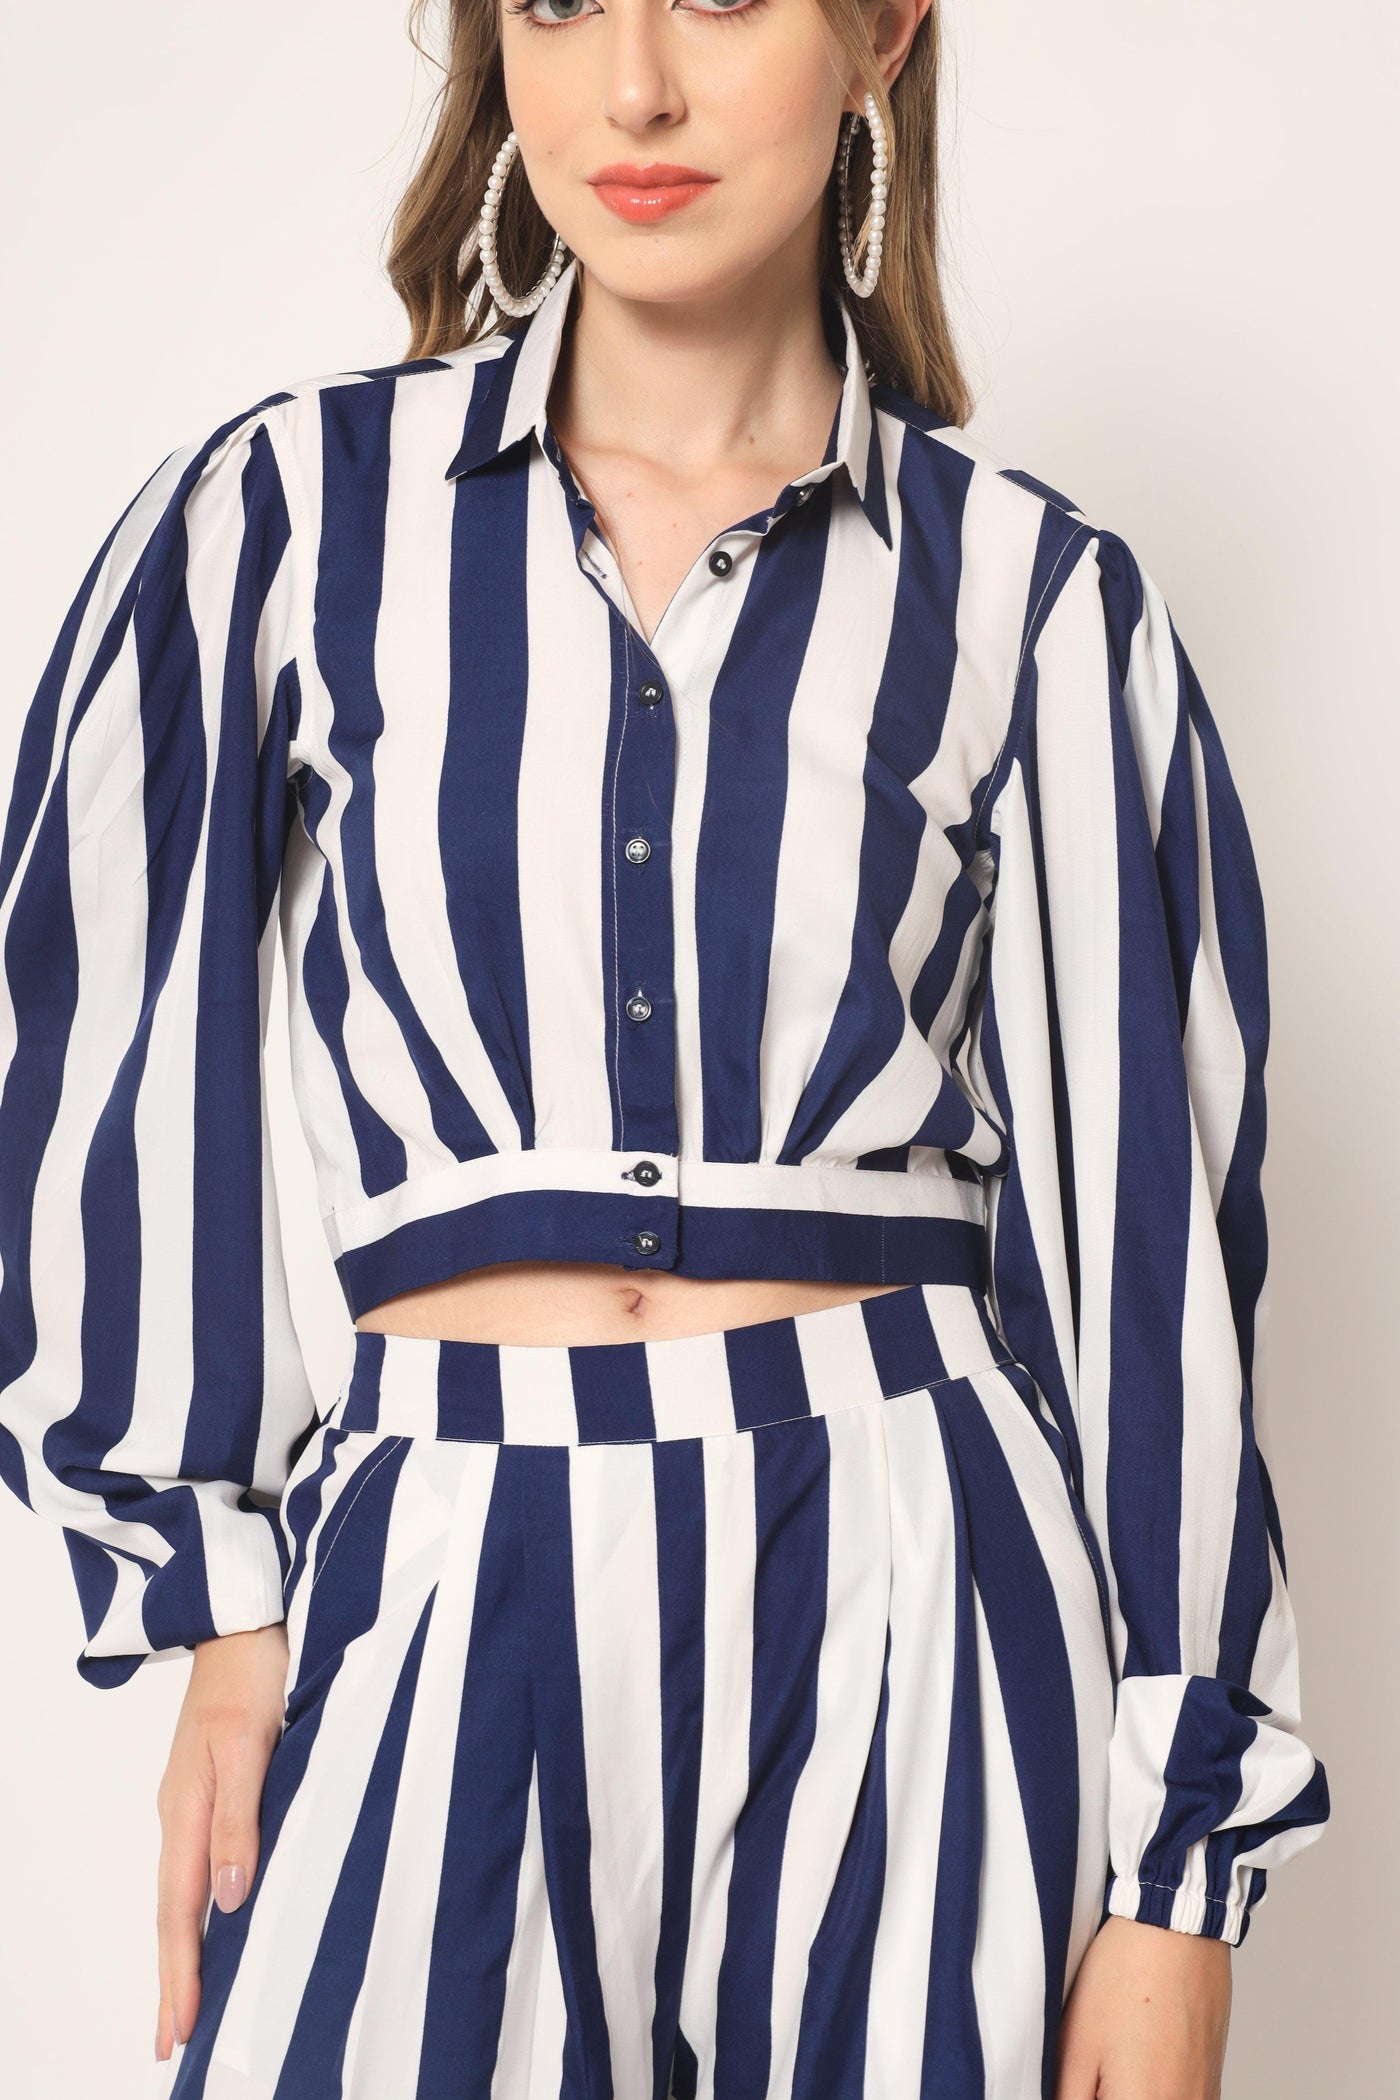 Blue And White Crepe Digital Printed Top With Matching Trouser - Uboric